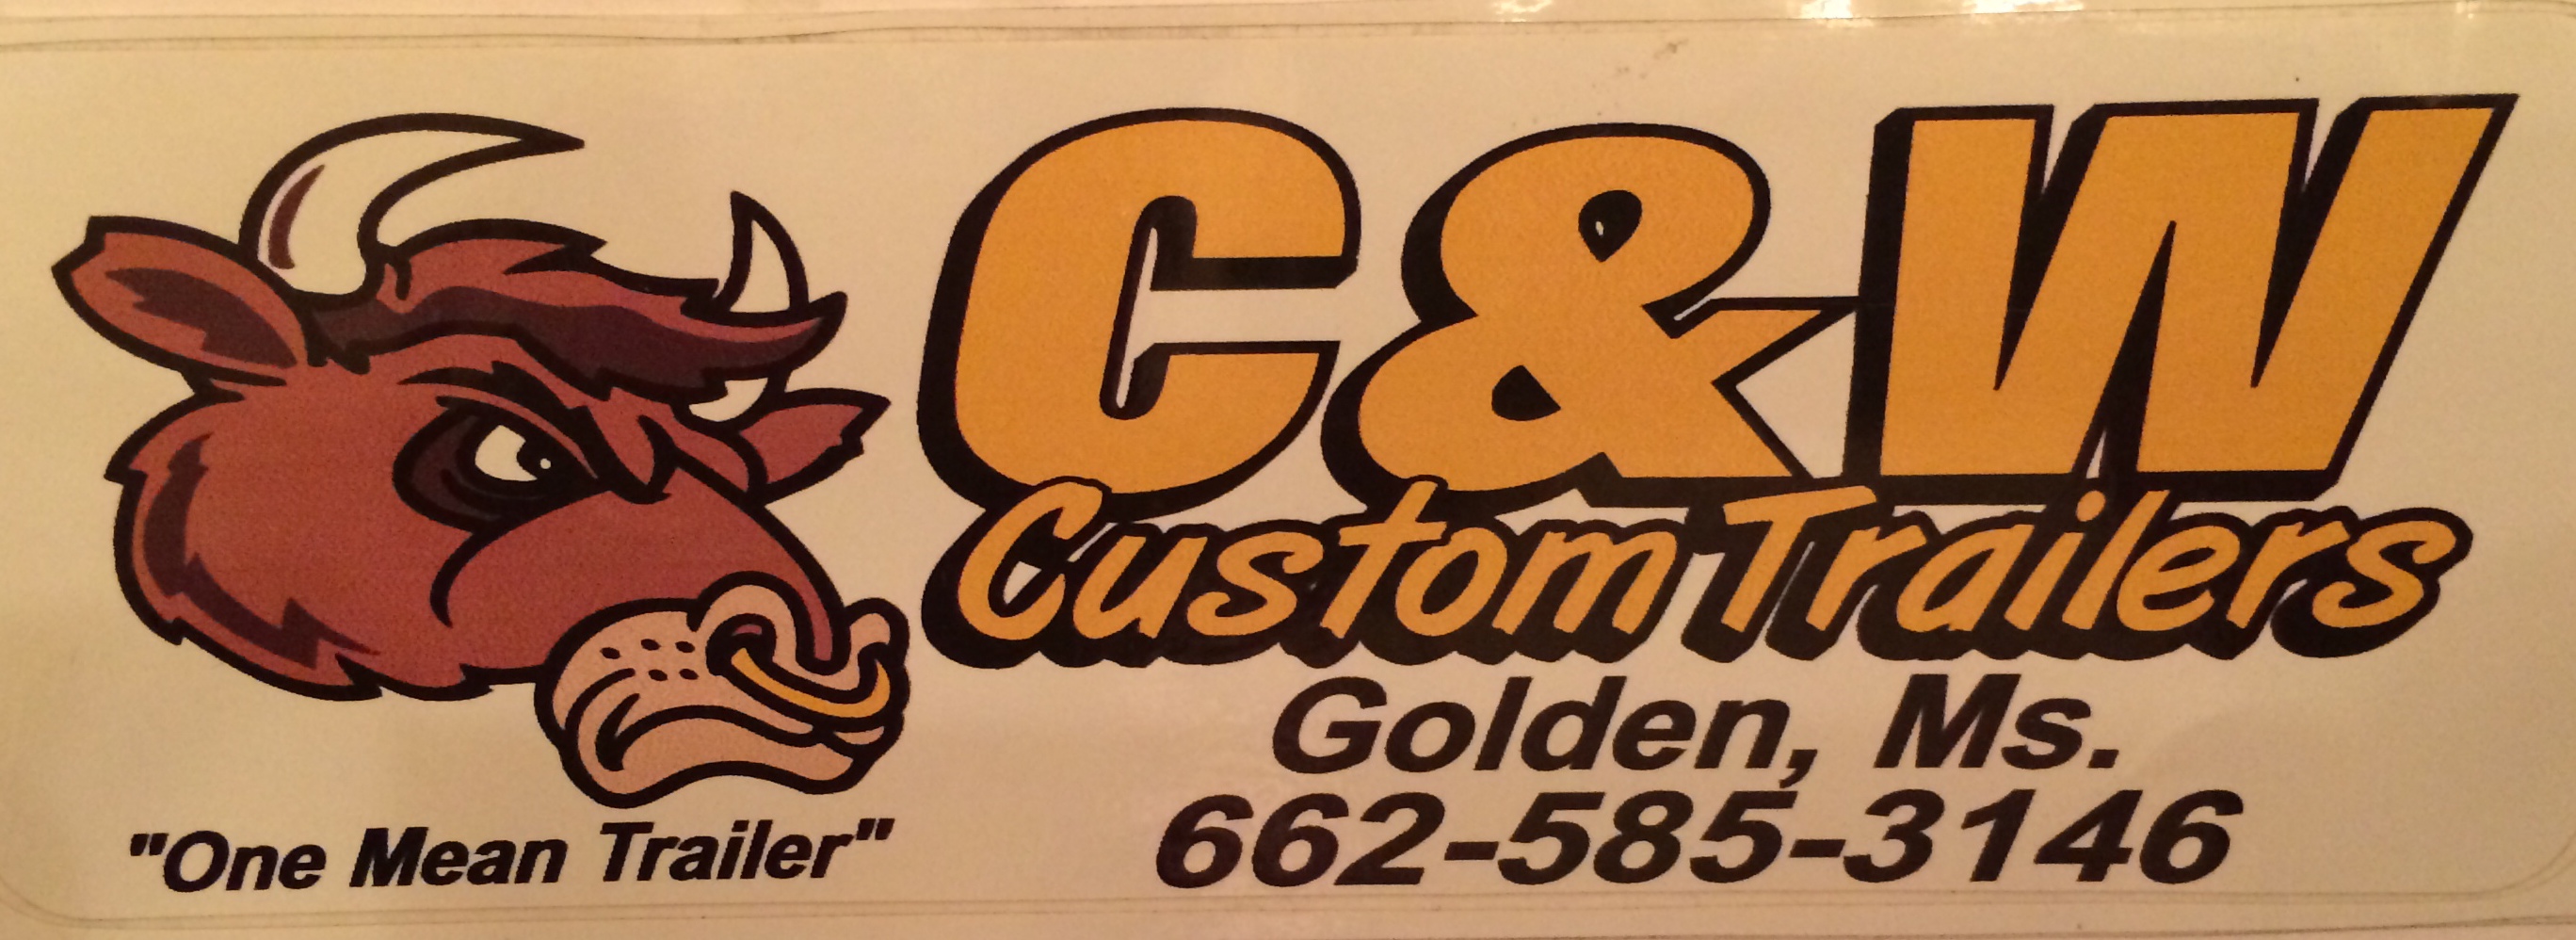 C&W Custom Trailers – The Cleveland Family (Reb & Blue Club)